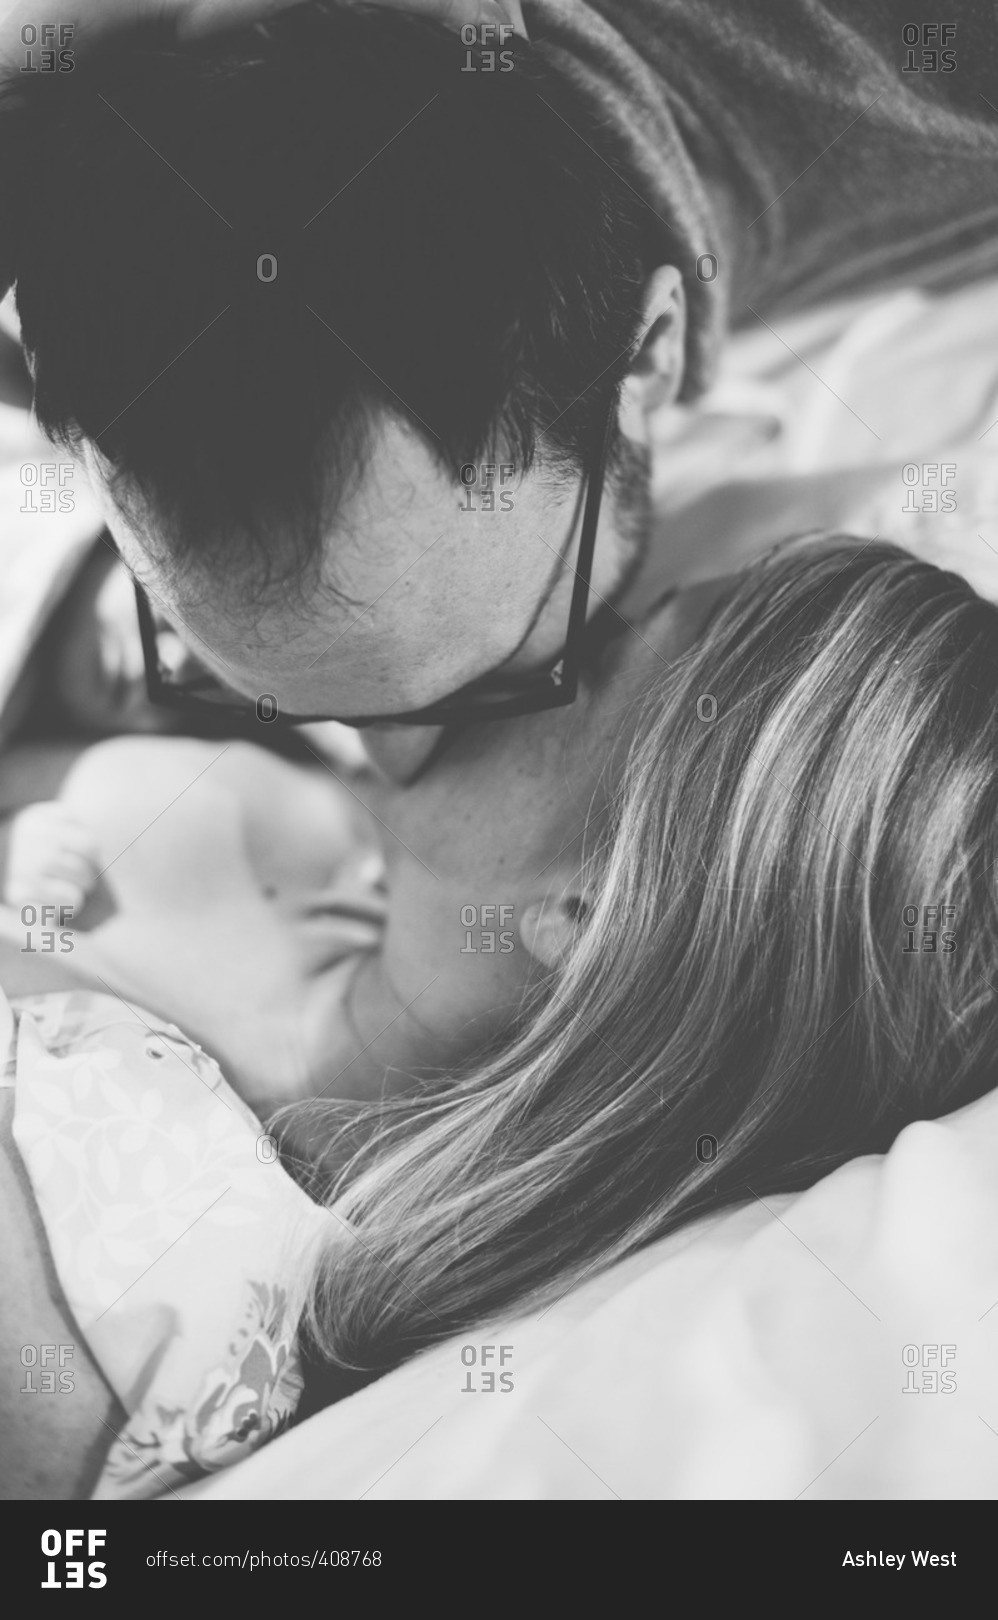 Man kisses his partner after the birth of their baby